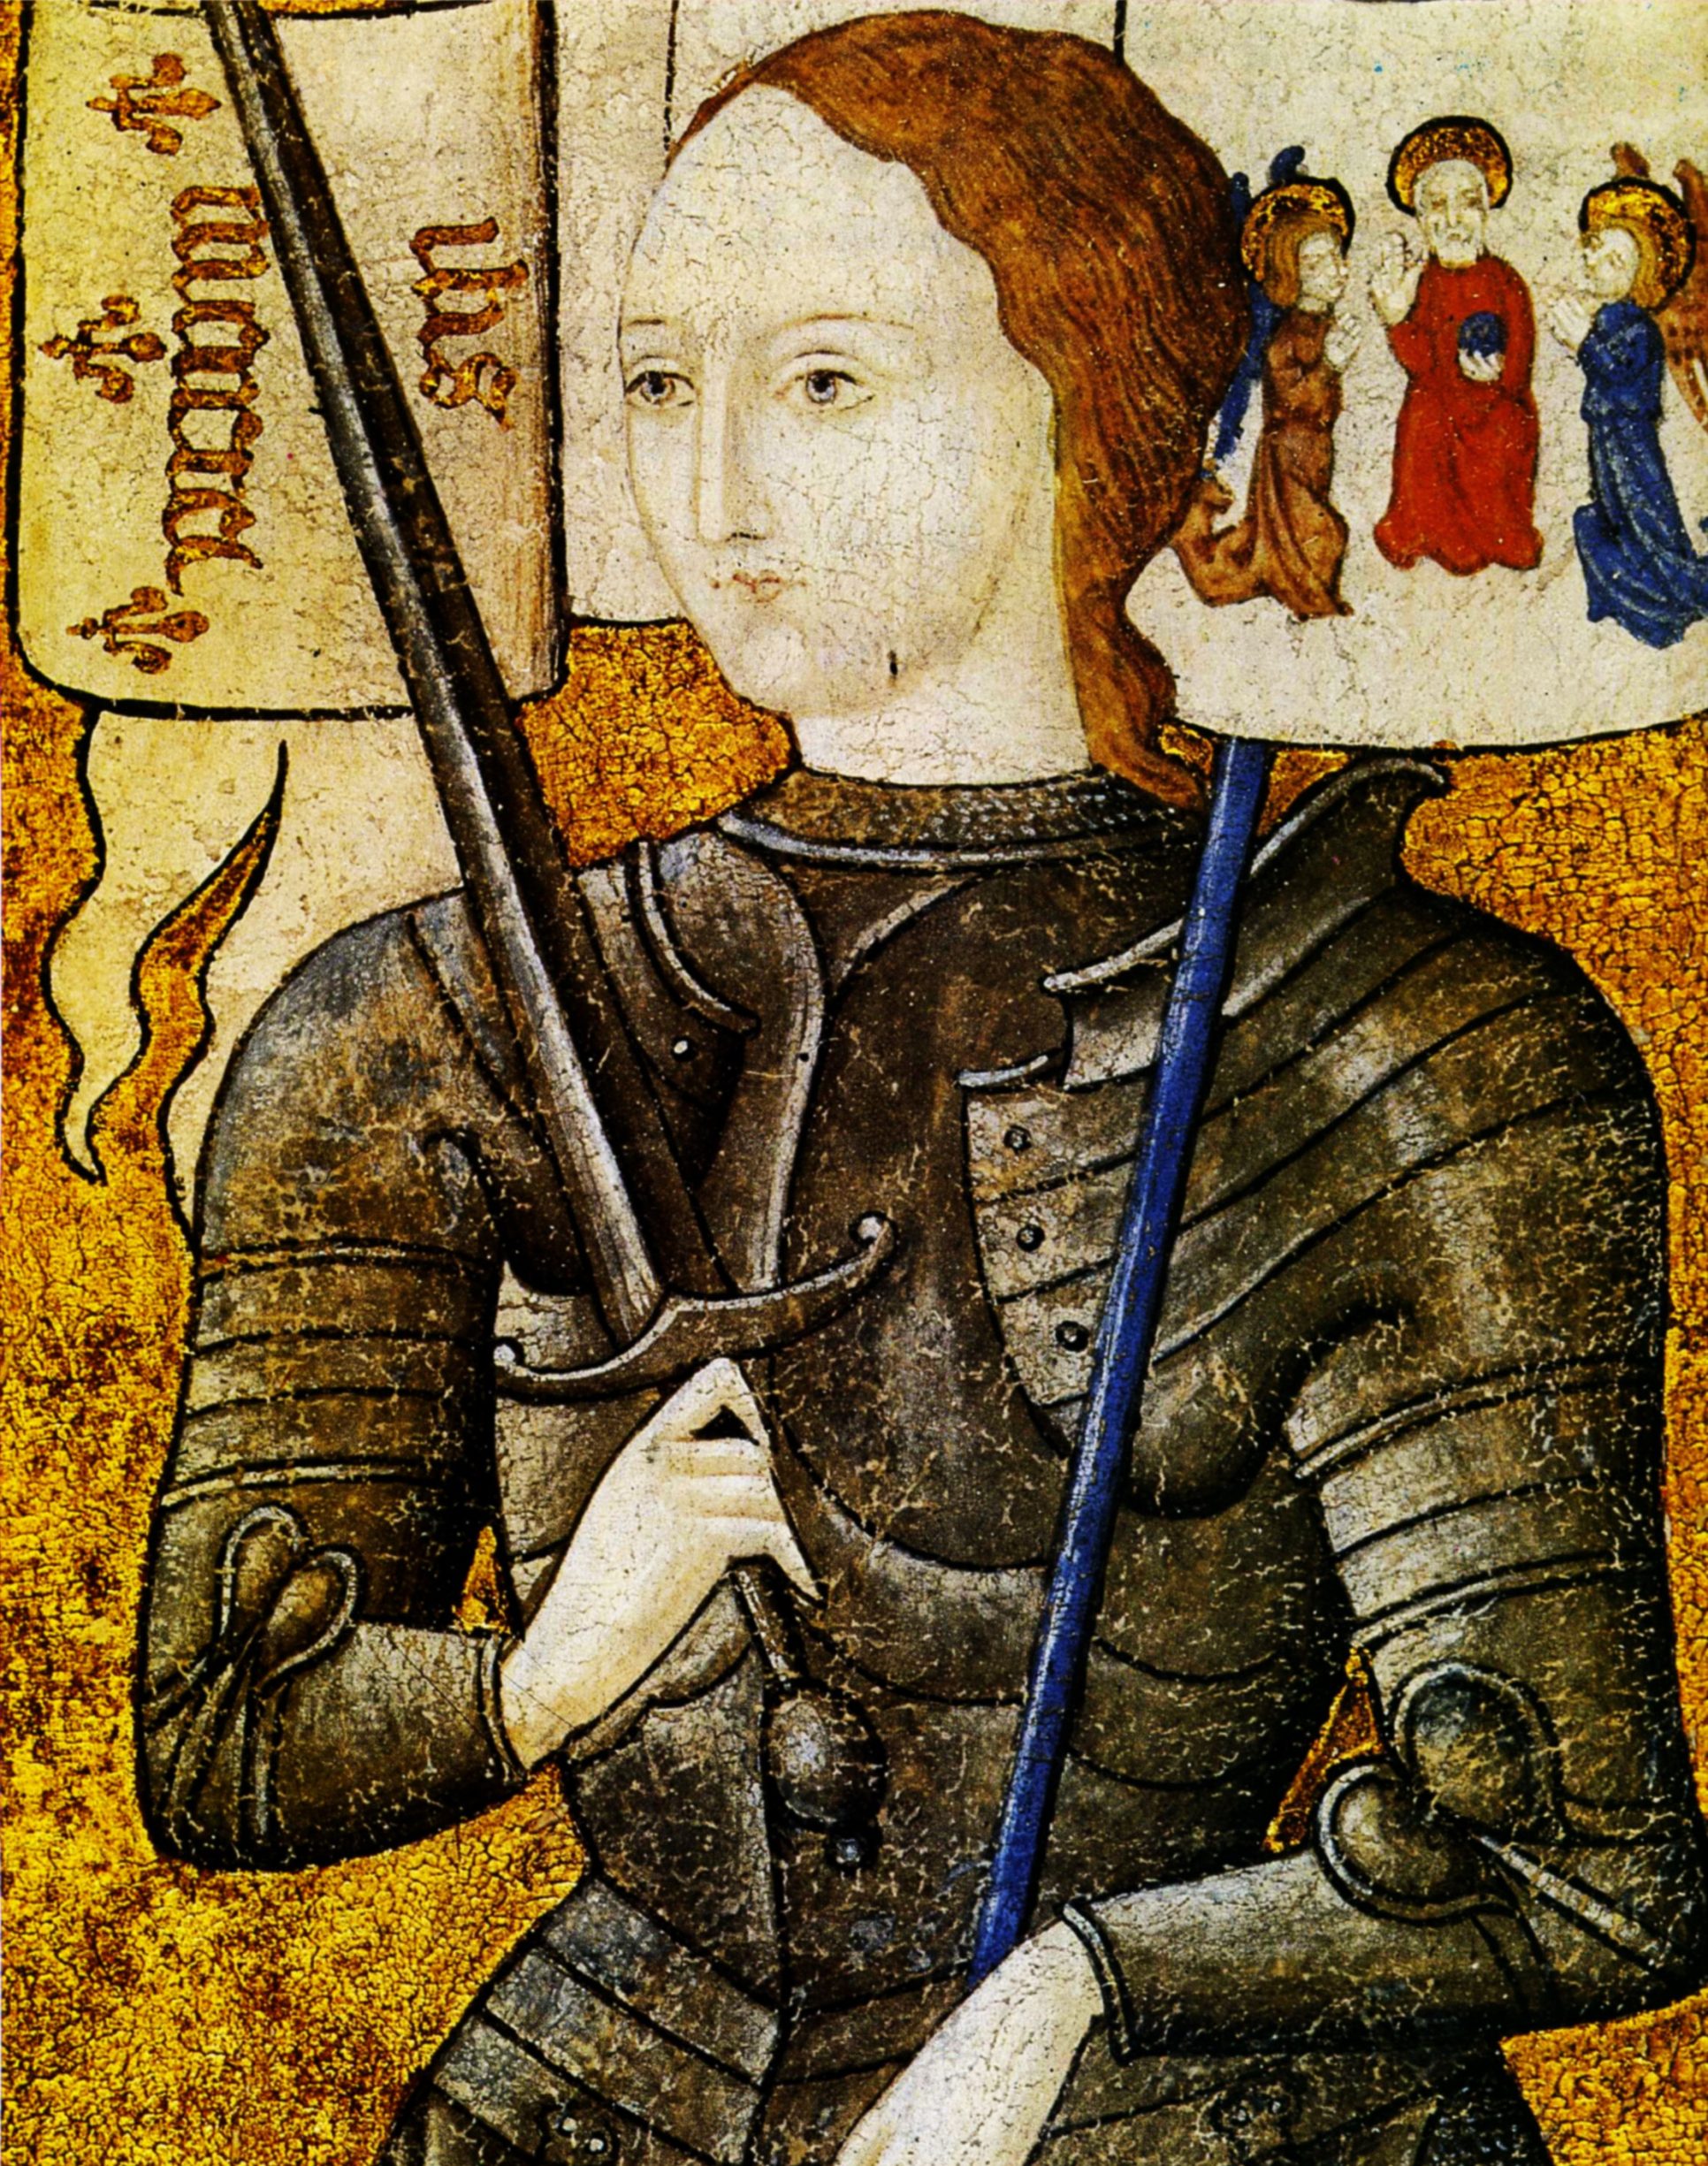 Johan of Arc. Oil on parchment and pigment painted between 15th century and 20th century by unknown artist. Collection: Archives nationales, Paris, France. Public Domain.